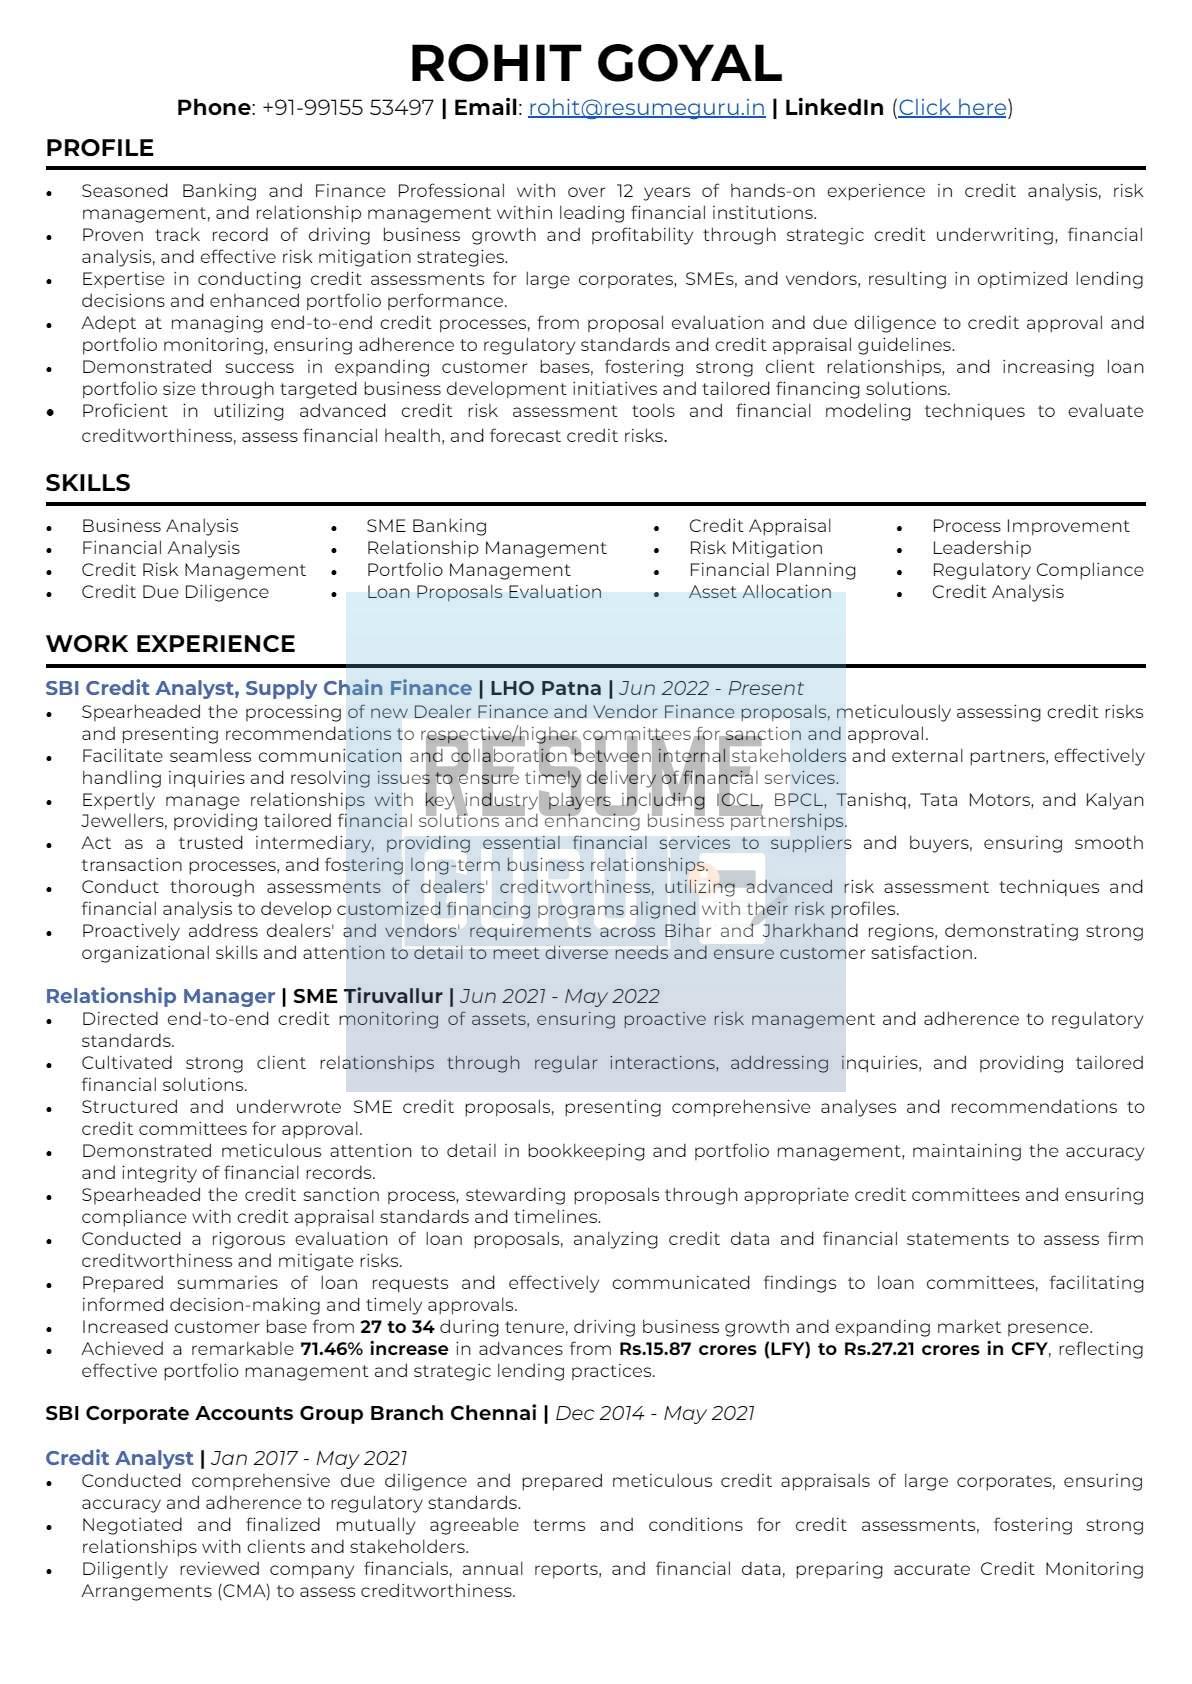 Mid-Level Banking and Credit Analyst Resume_1